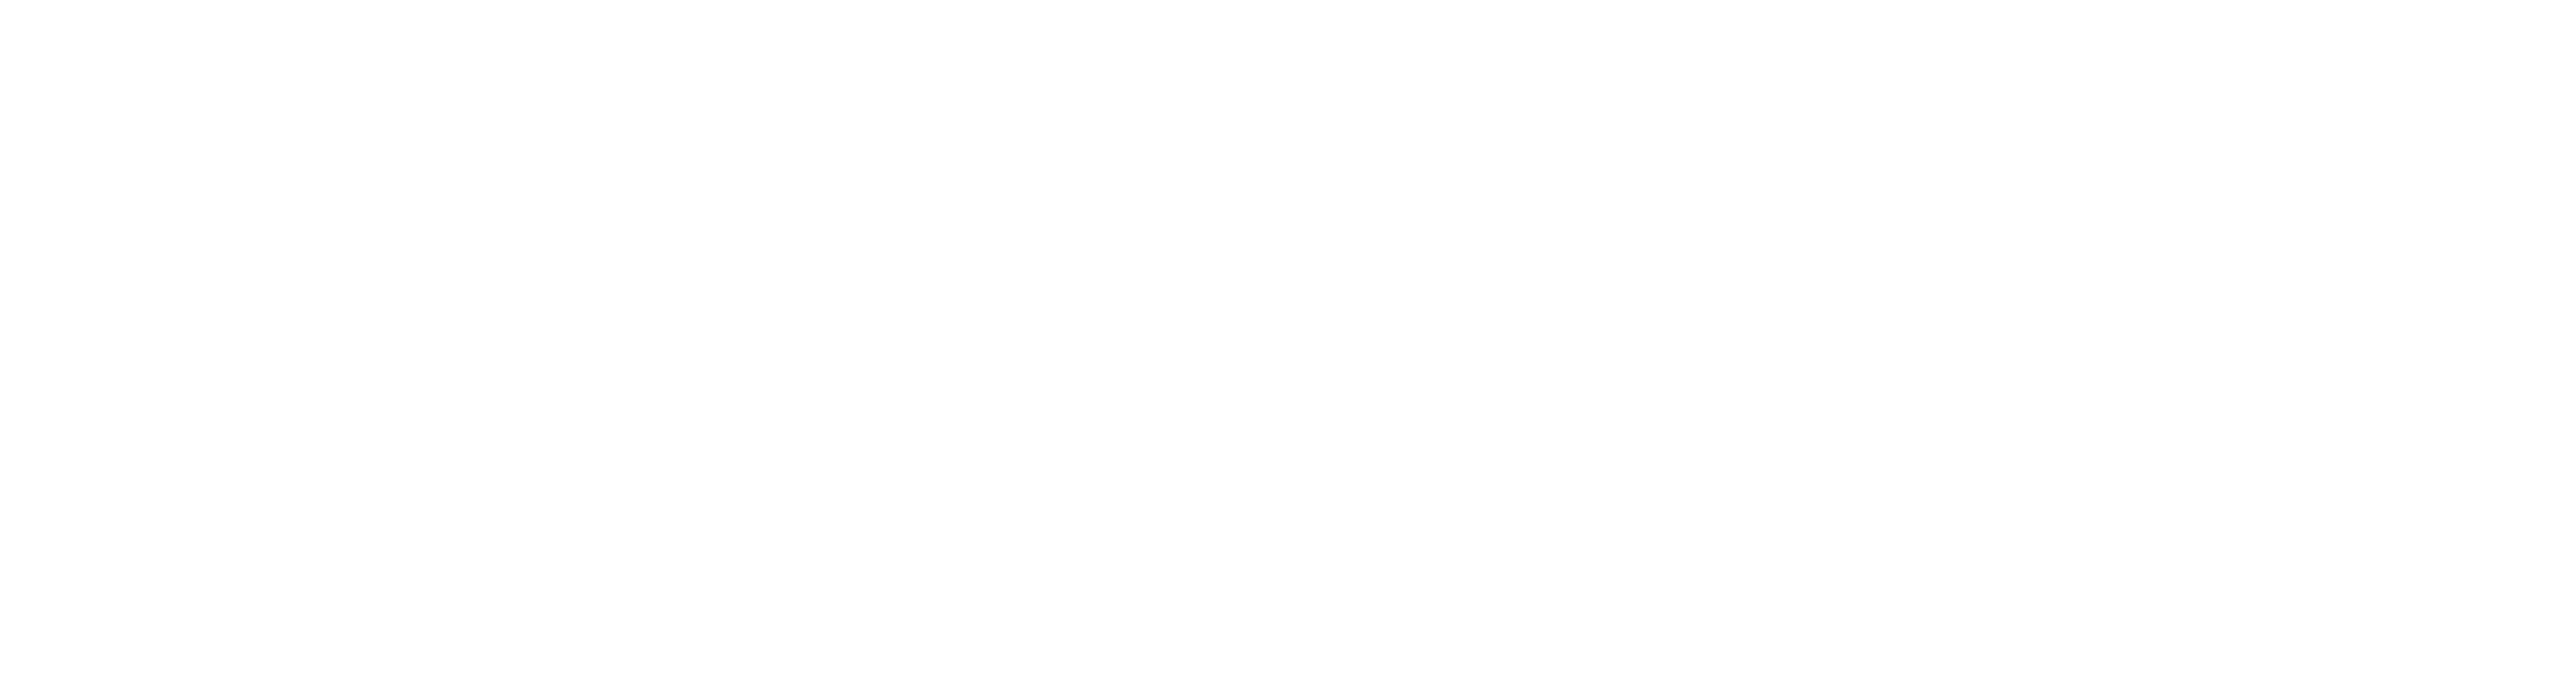 BuyBoxes Business Logo (White)